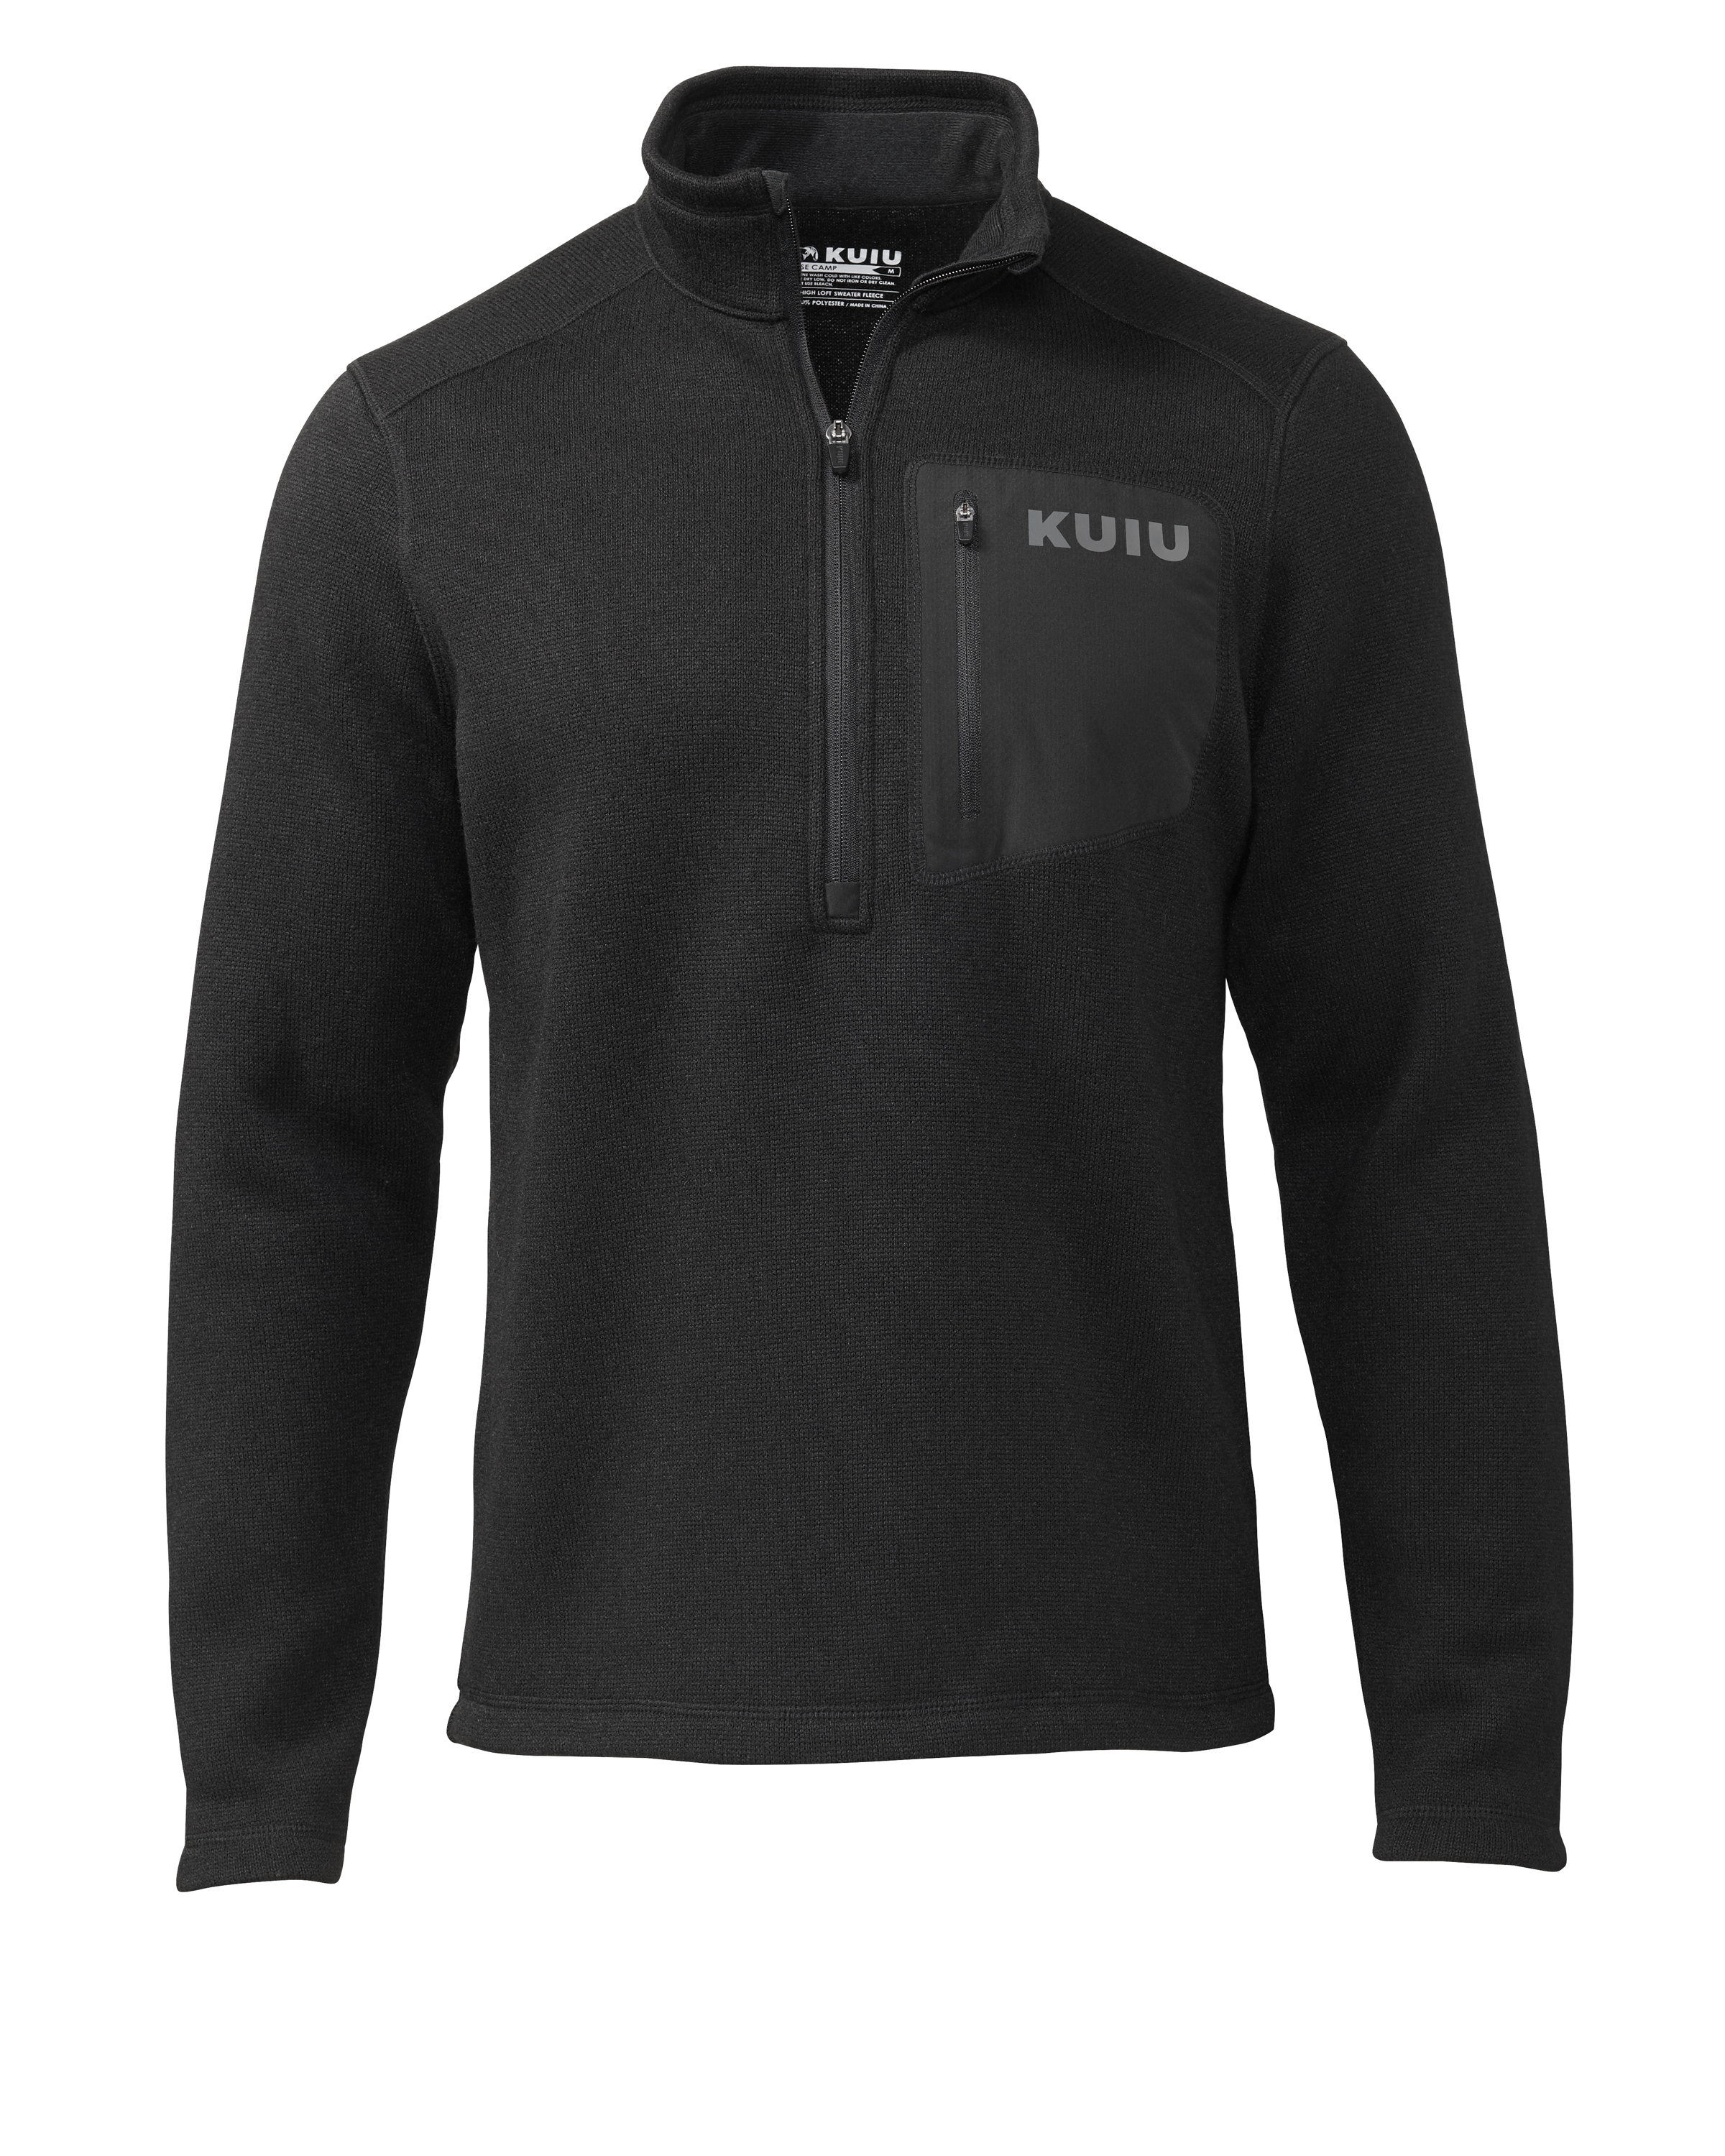 KUIU Base Camp Pullover Sweater in Black | Size 3XL